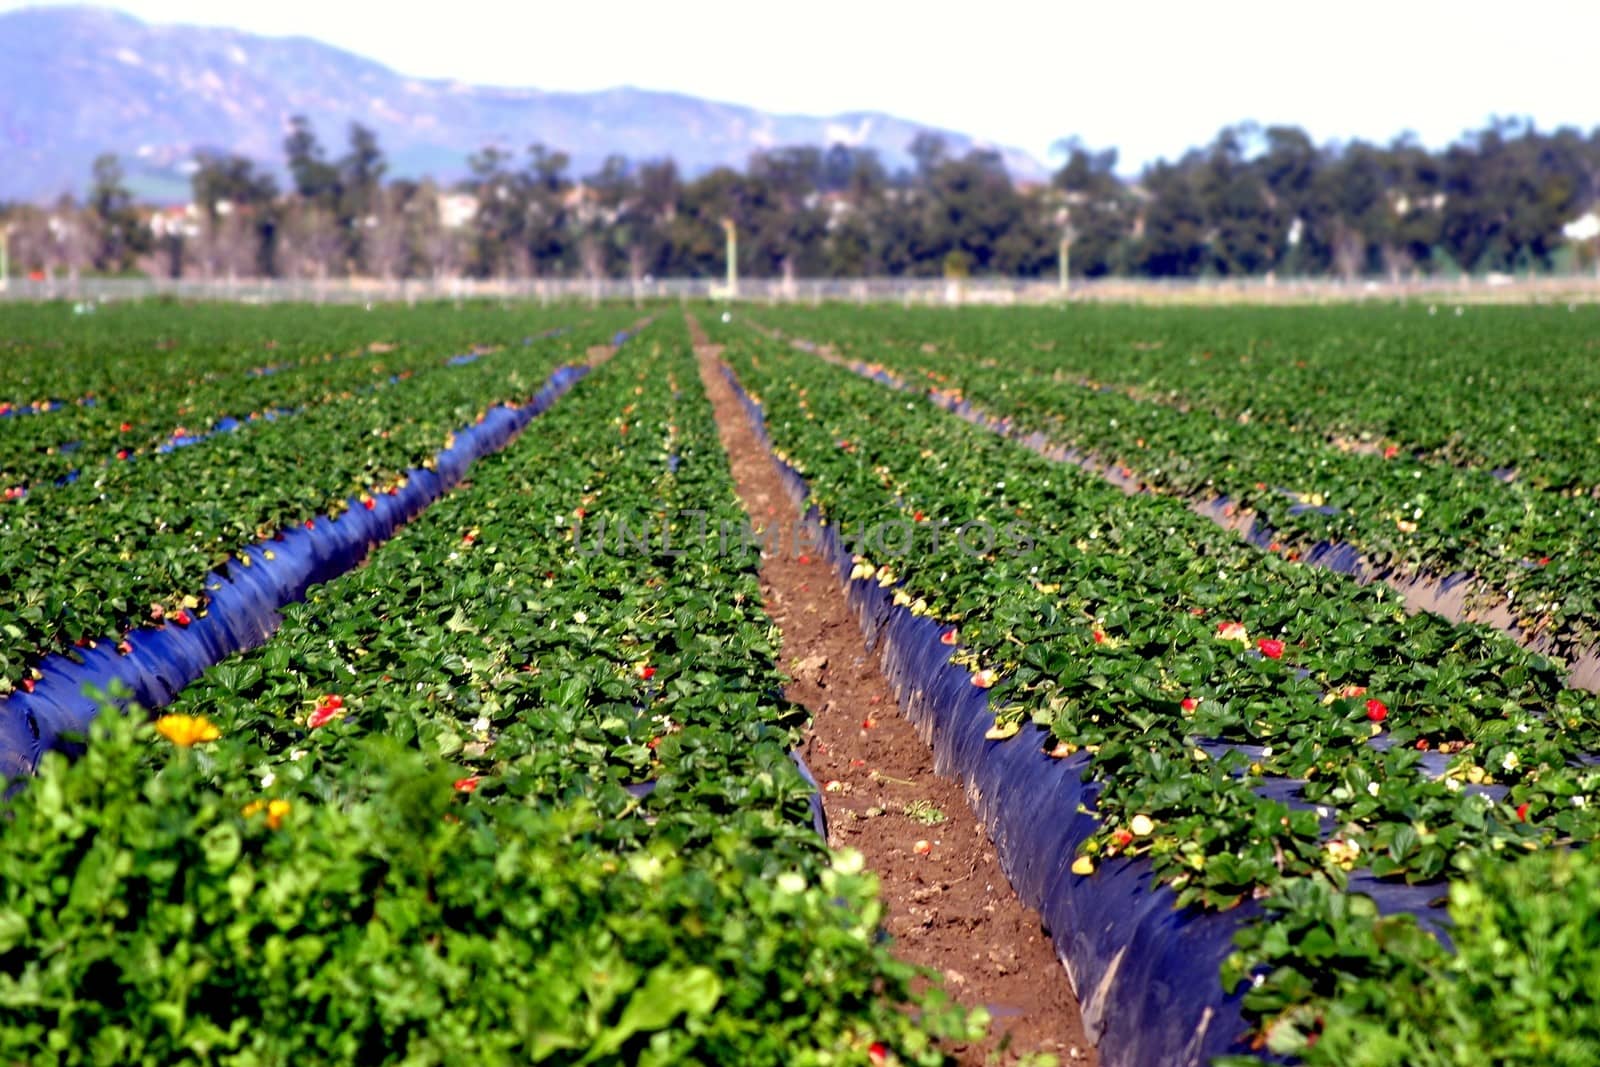 View of the rows at a strawberry field.